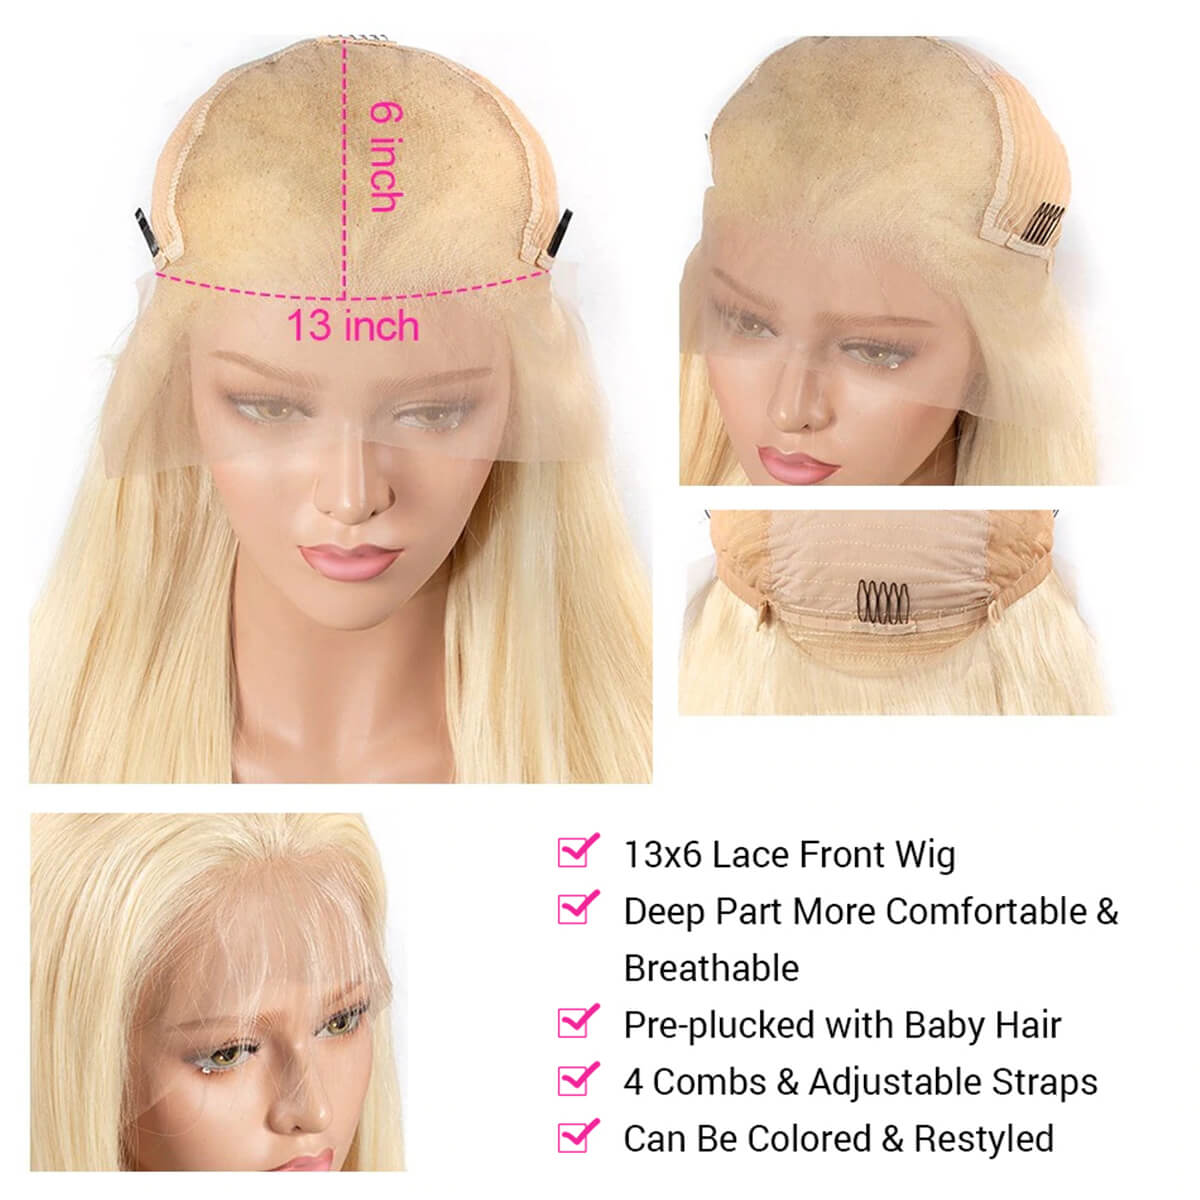 13×6 body wave front wig,13×6 body wave lace frontal wigs,13×6 blonde body wave lace frontal wigs,613 blonde body wave front wig,cheap 13×6 blonde body wave front wig